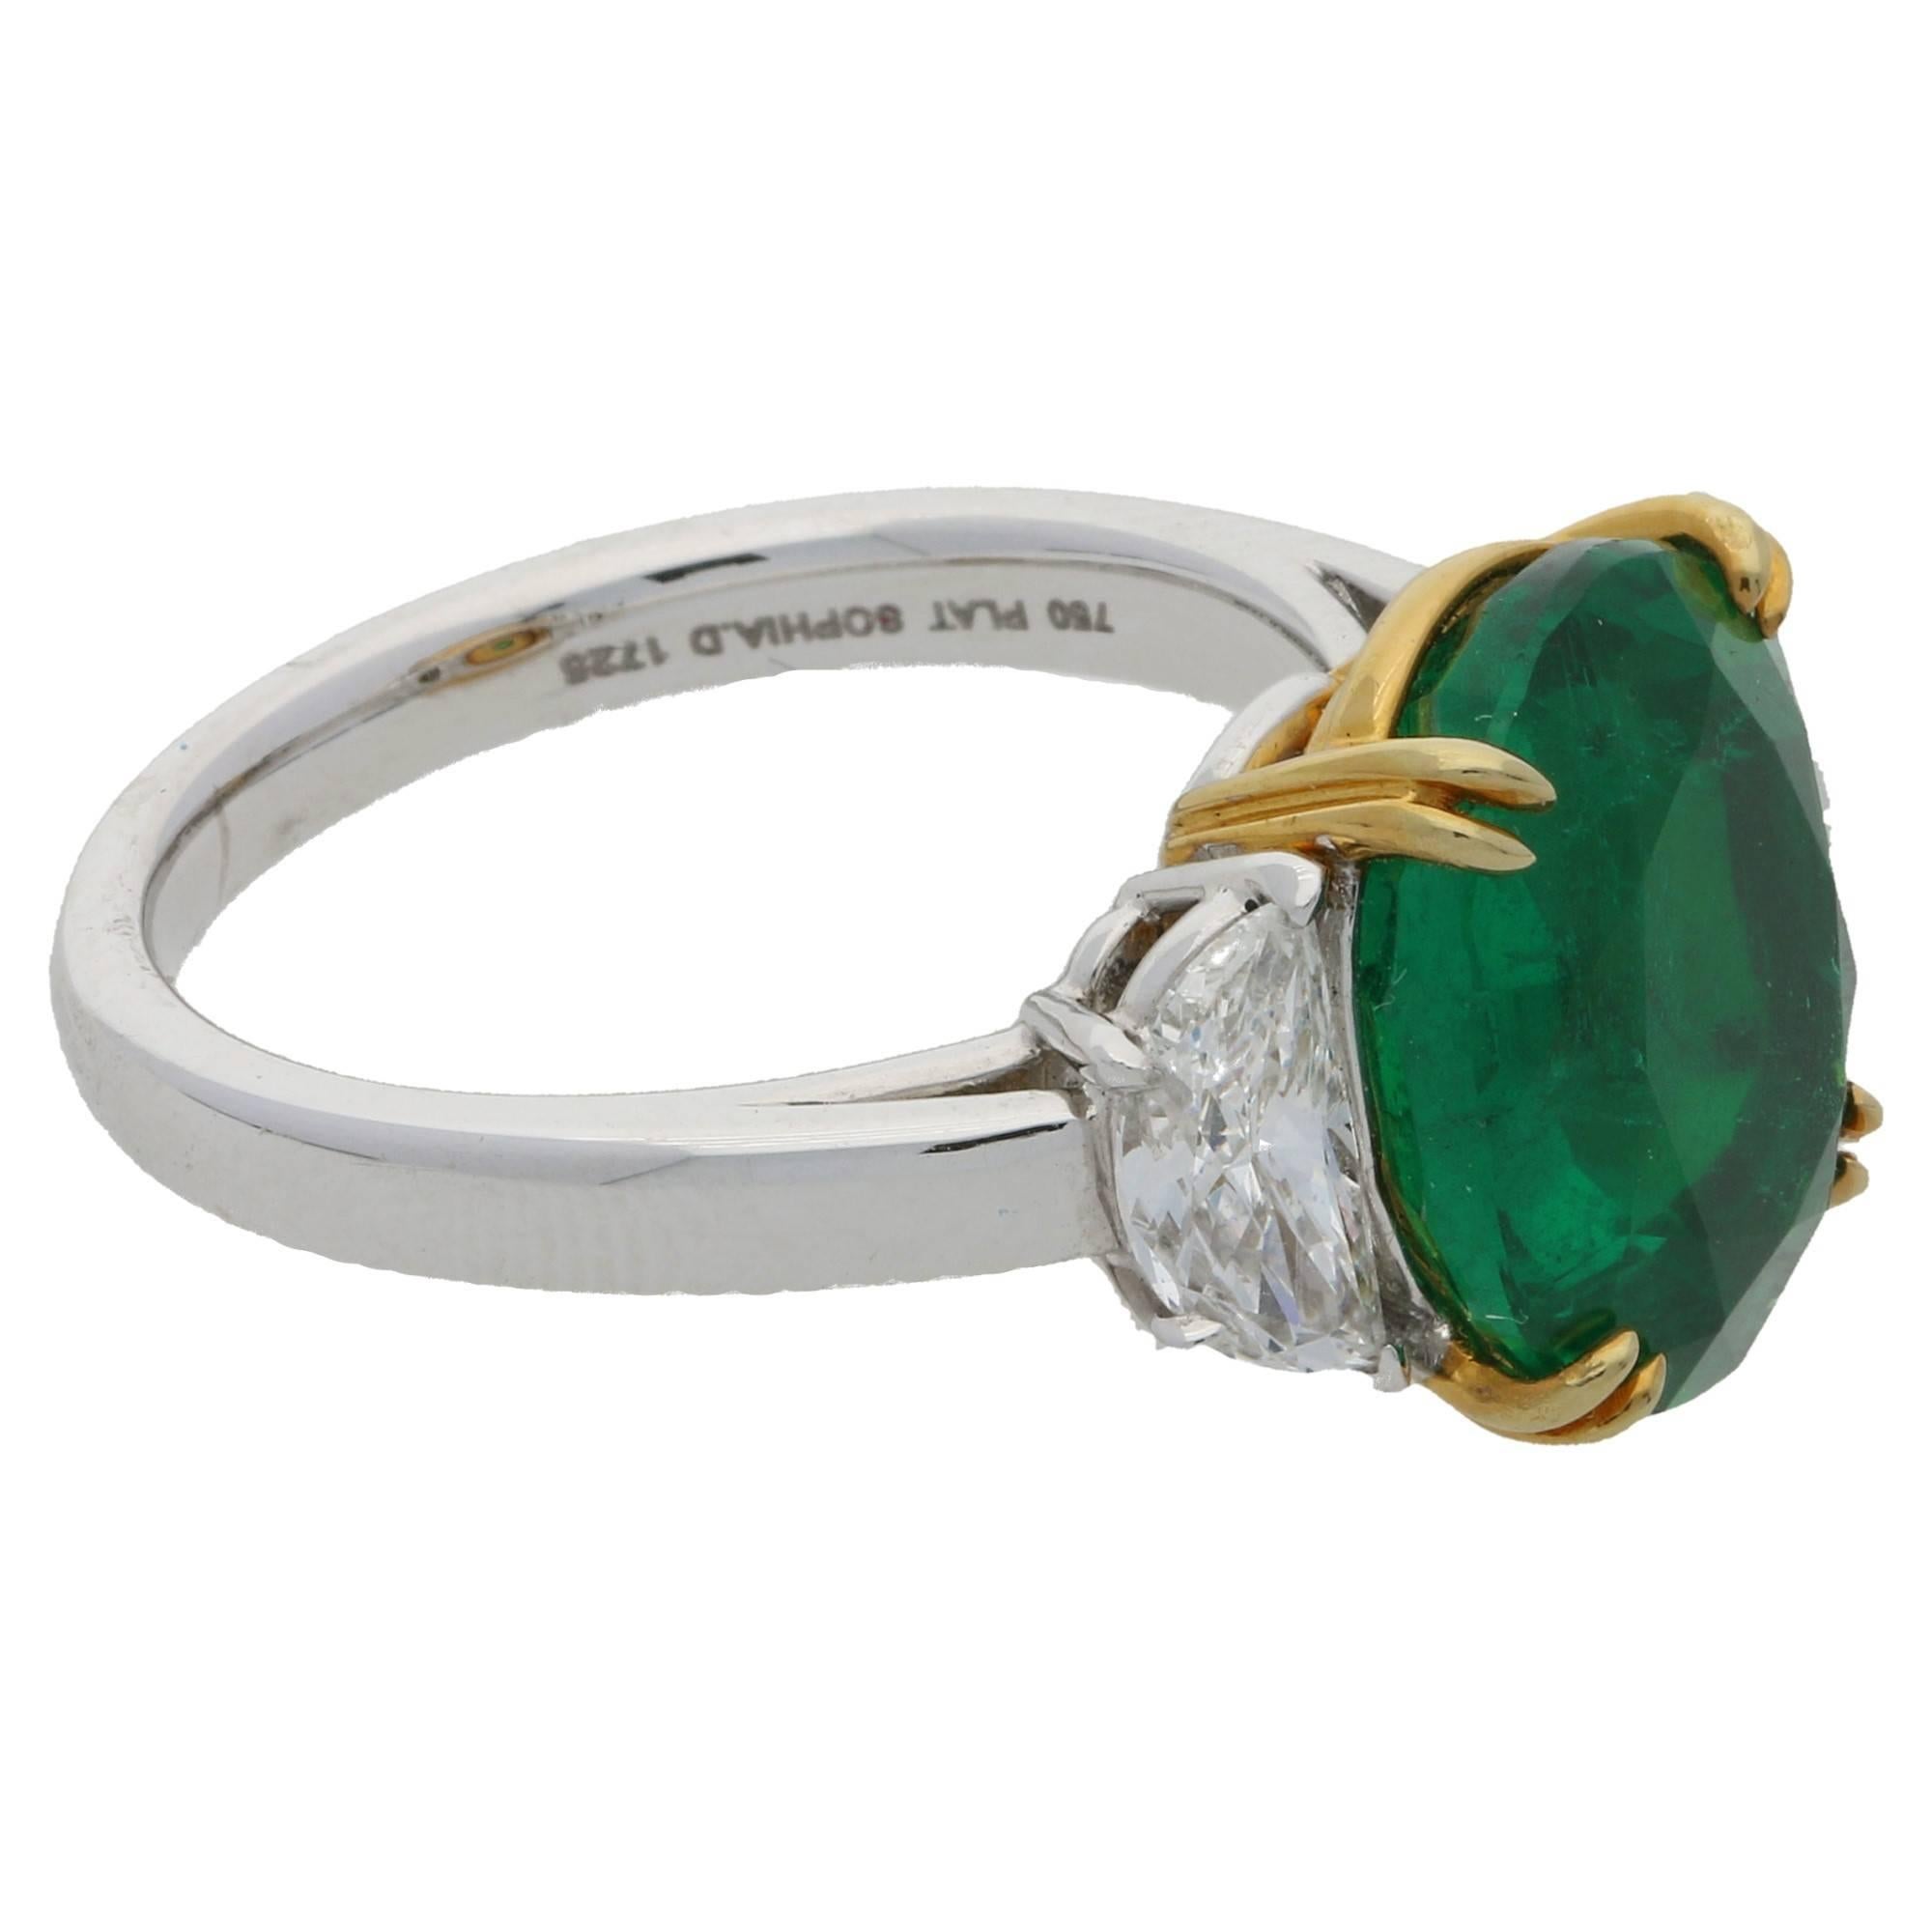 A three stone ring featuring an exquisite oval faceted Colombian emerald of a vibrant green colour with excellent conisistency of colour throughout the stone, set in a double four claw basket setting in 18ct yellow gold with a half moon cut diamond